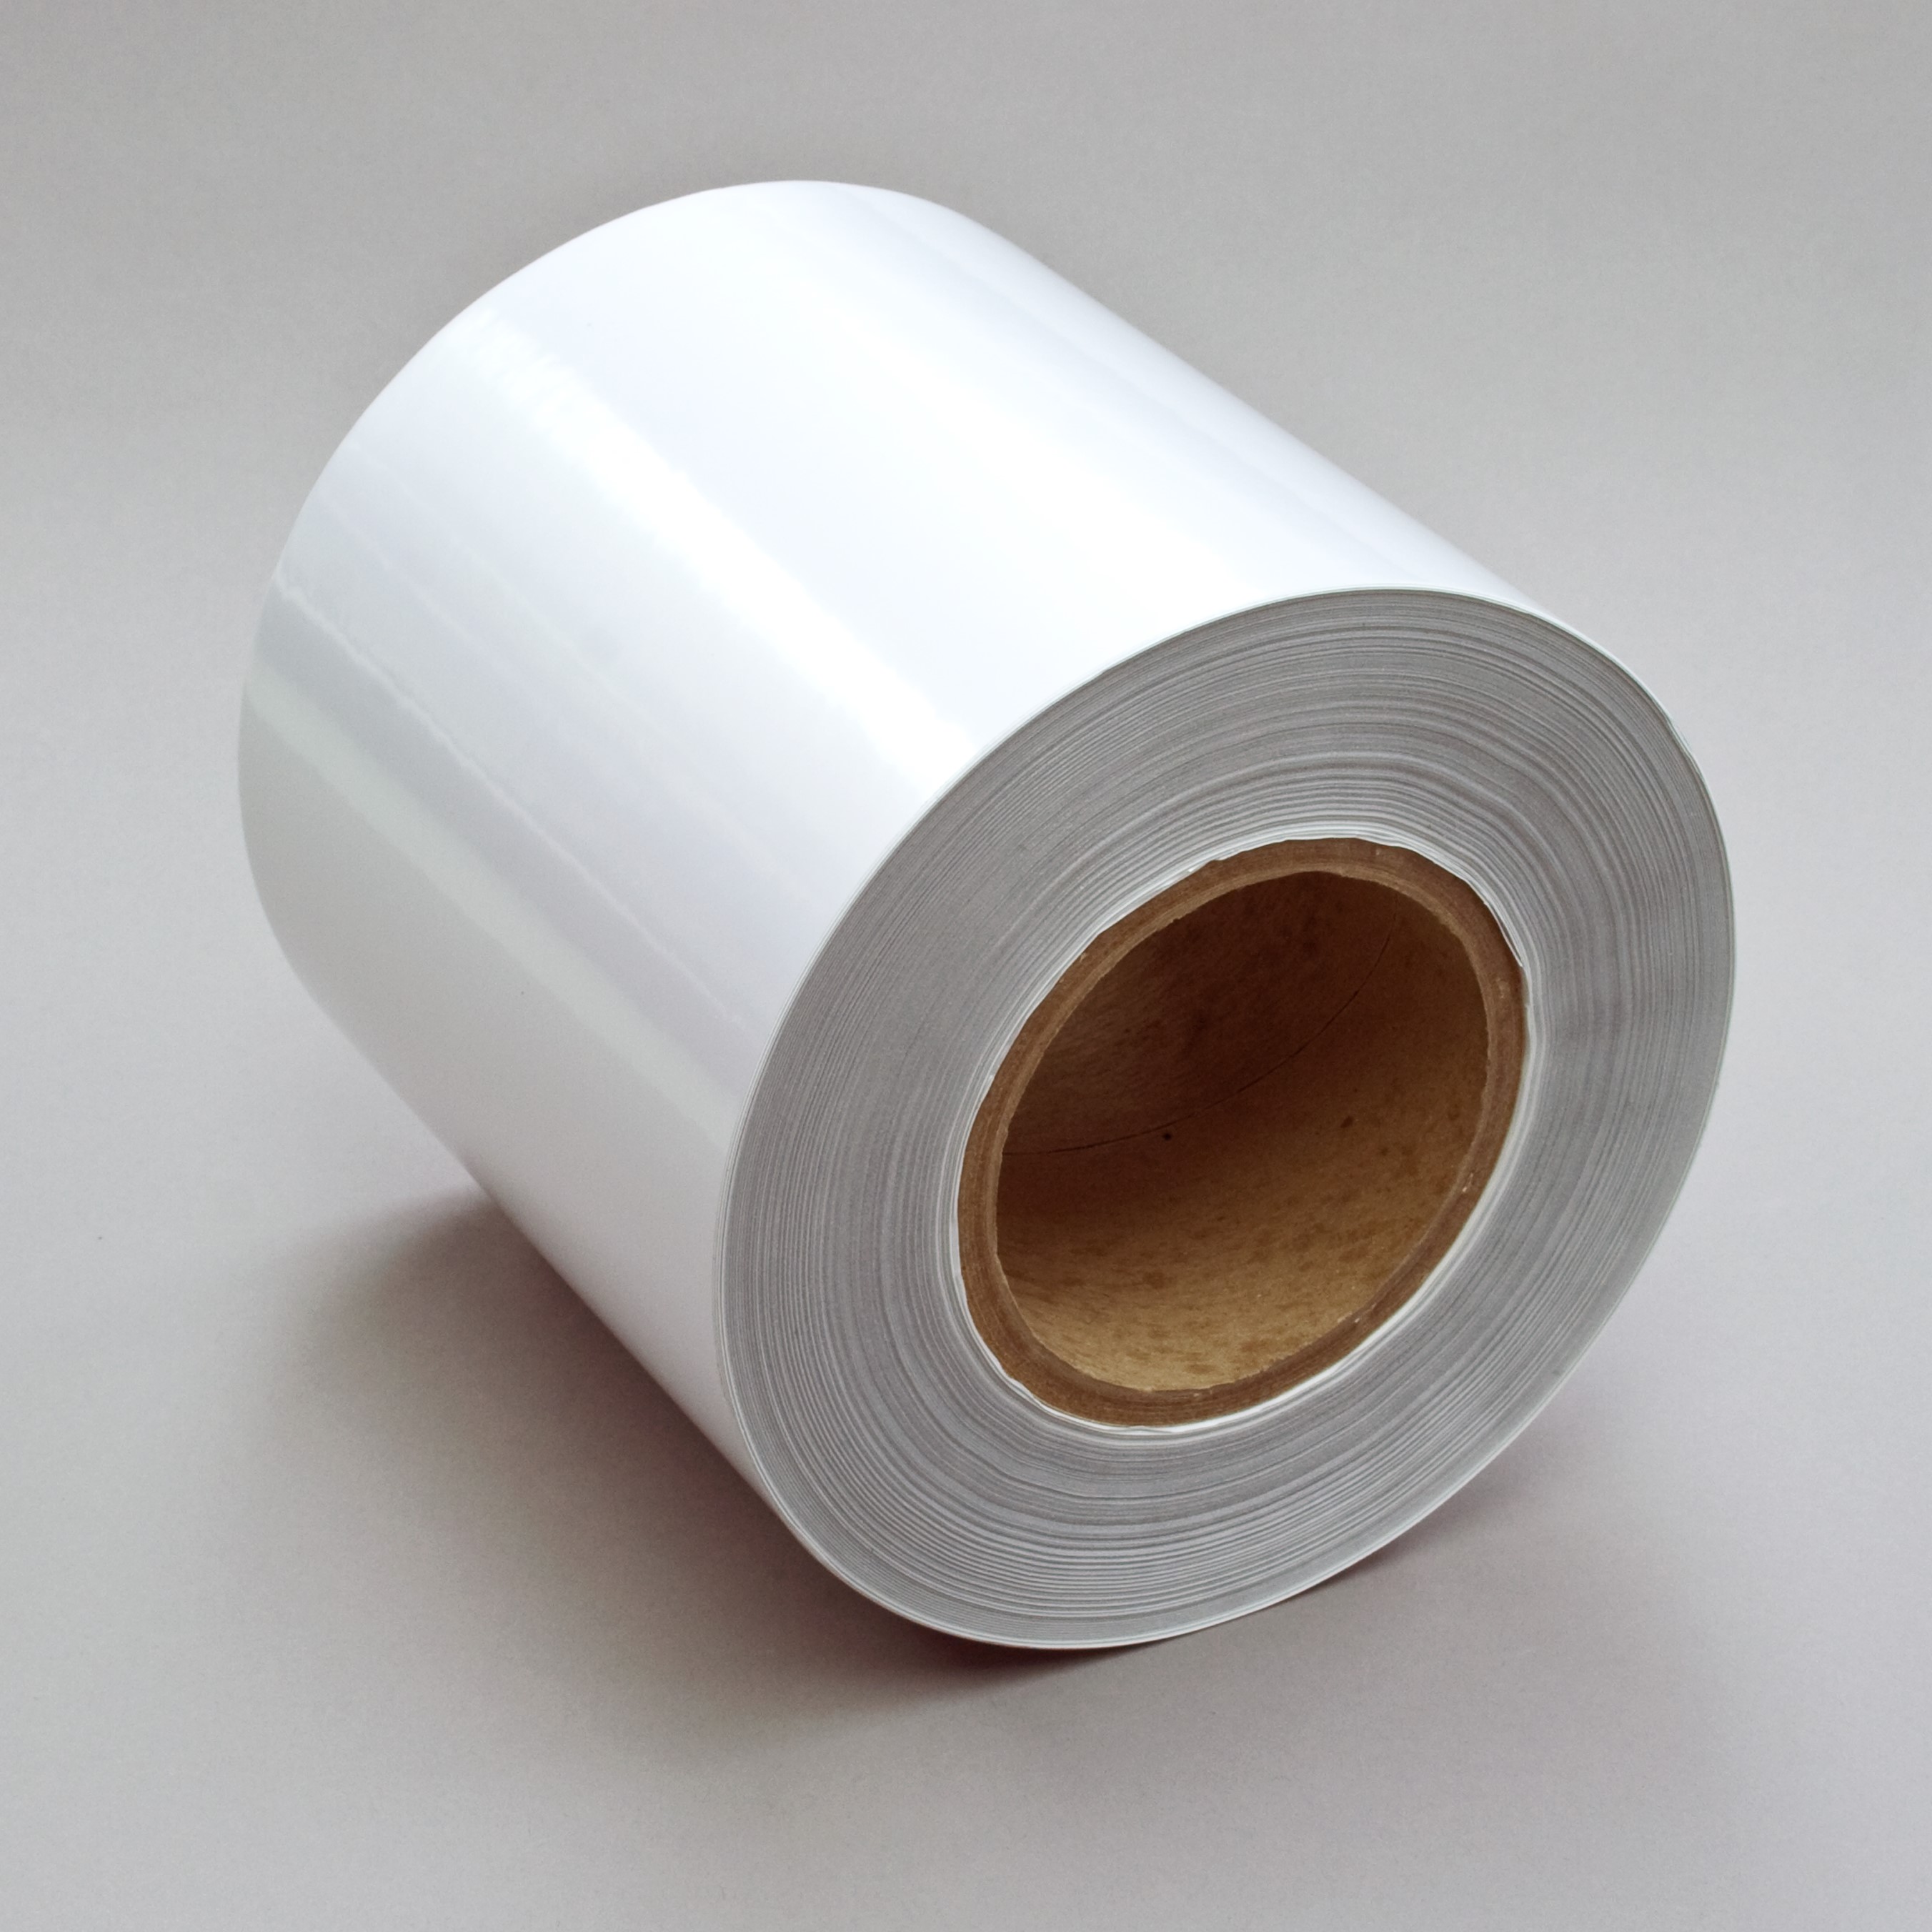 3M™ Thermal Transfer Label Material 7875, Platinum Polyester Gloss, 6 in x 1668 ft, 1 roll per case > Label Stock > General Store